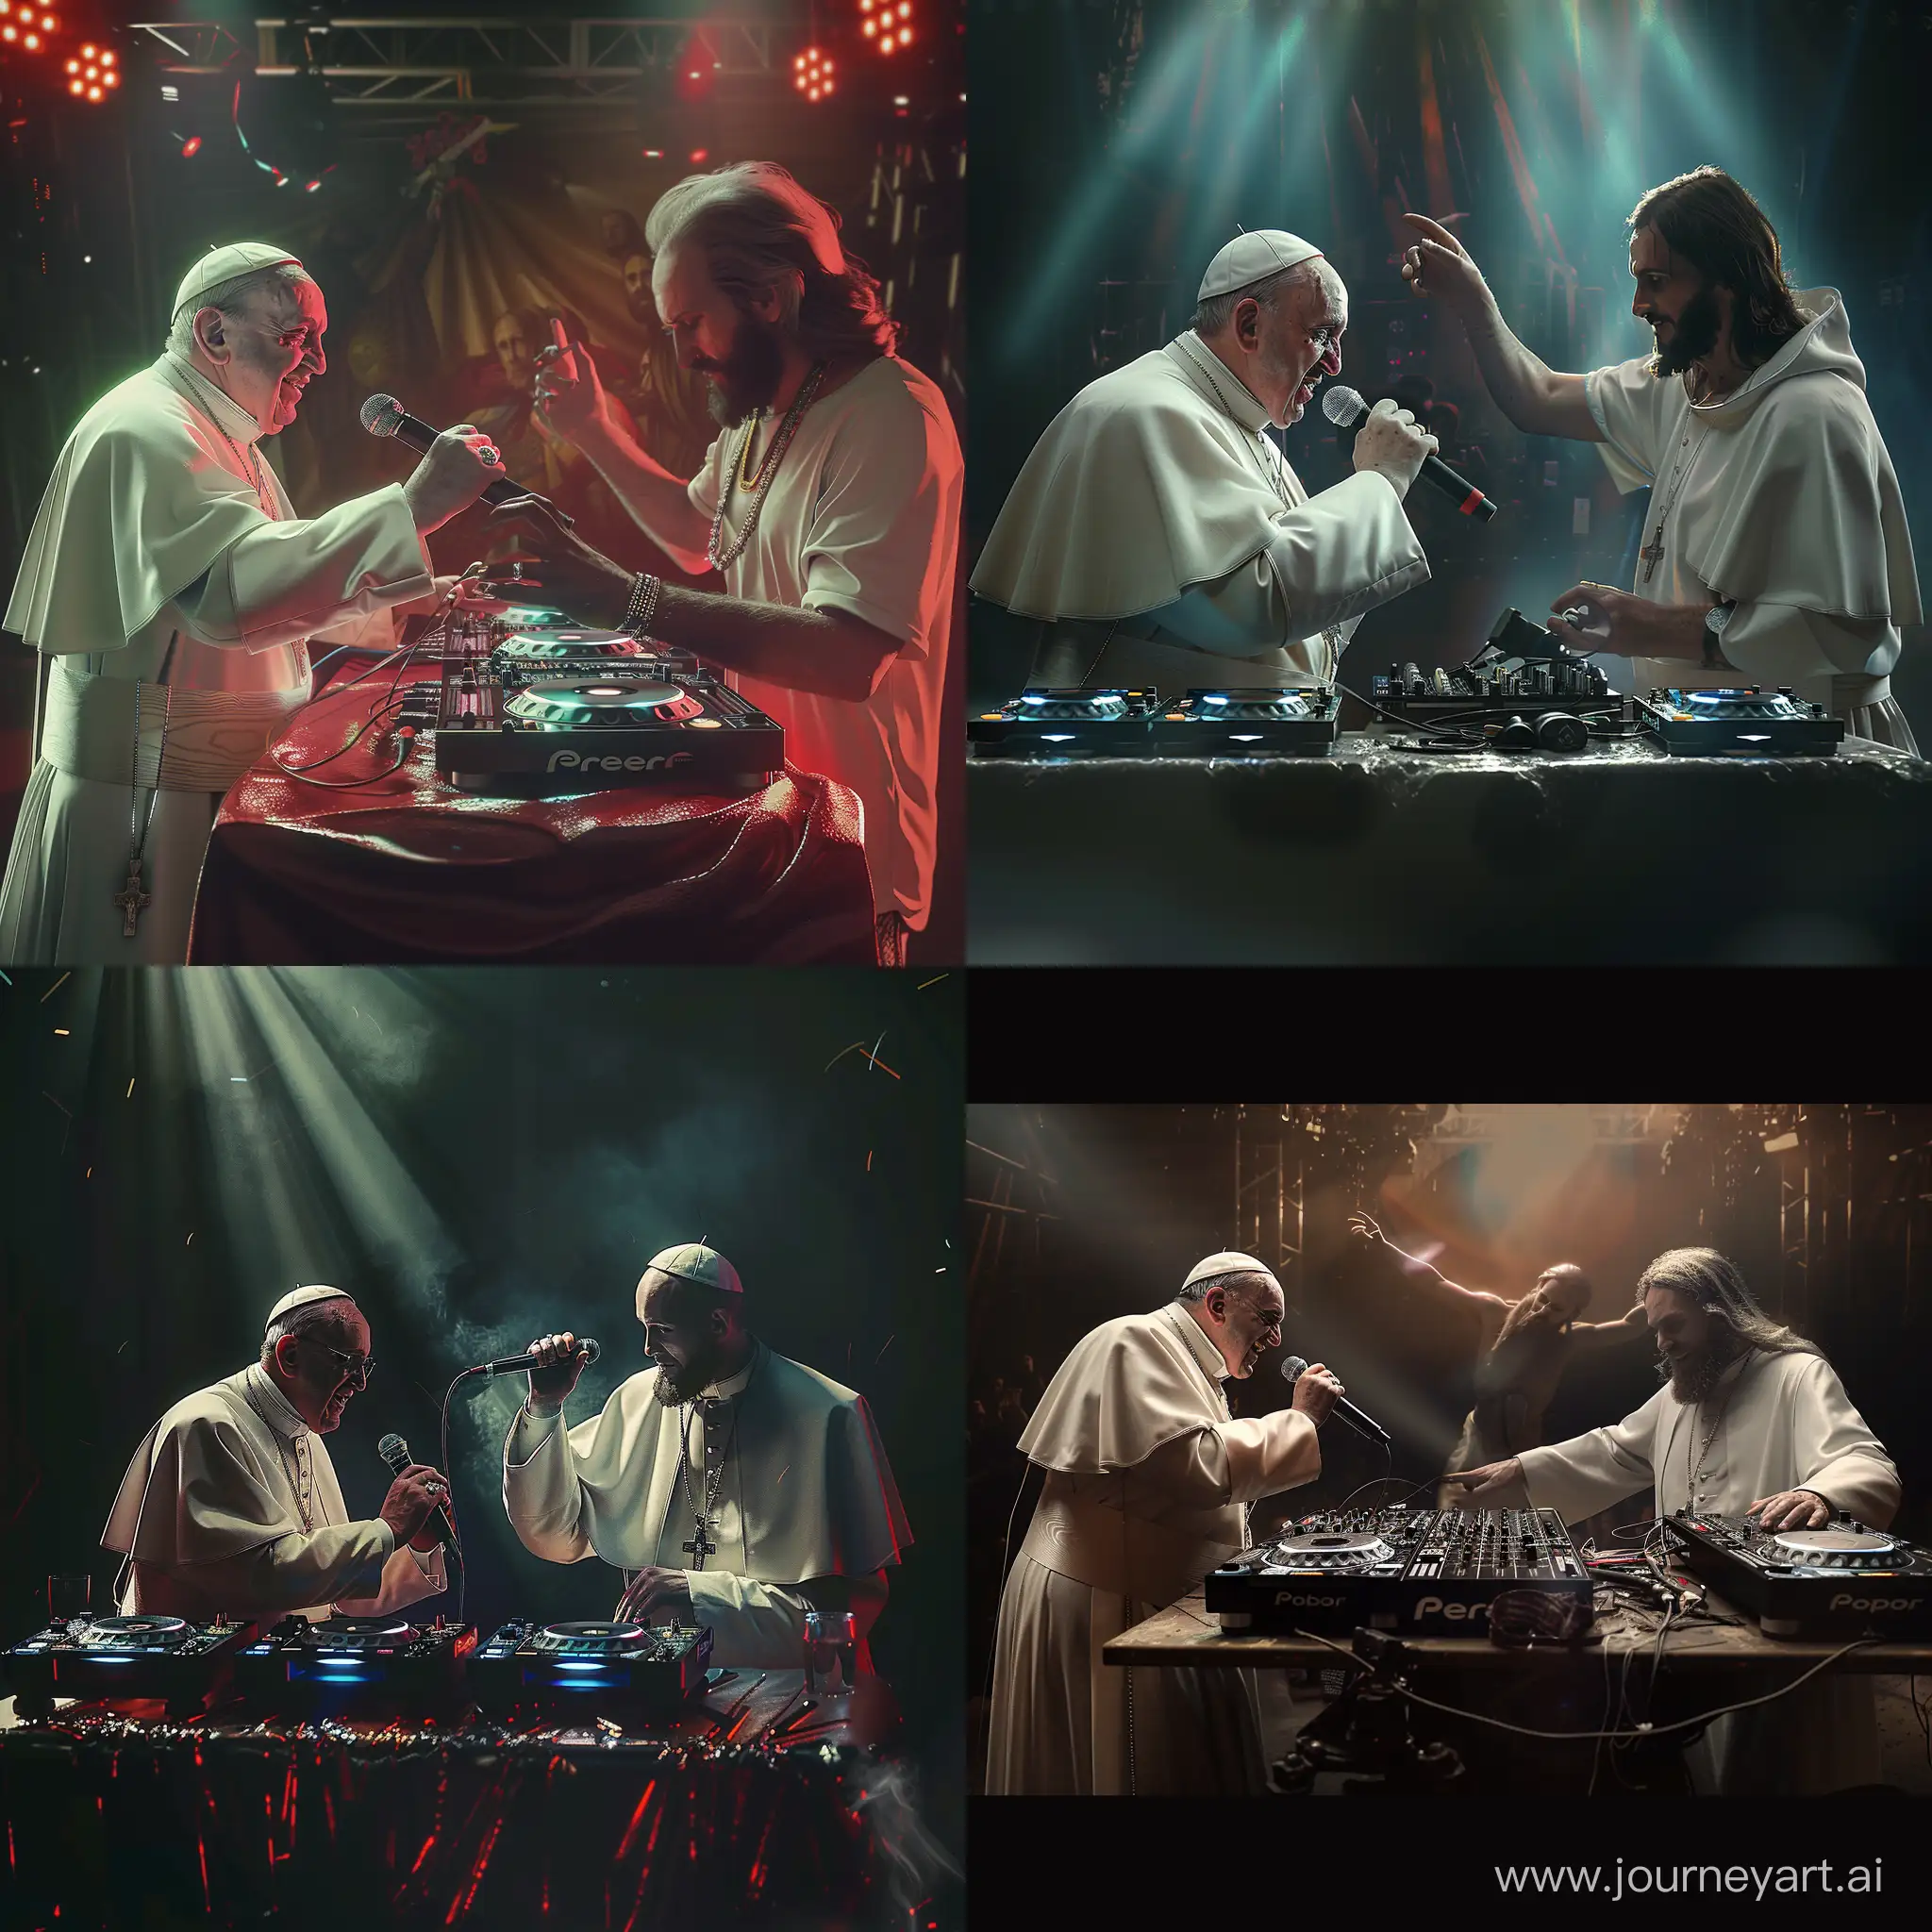 Hyperrealistic cinematic 8k image of pope francis rapping in a concert with a microphone. While Jesus Christ is working as the dj, mixing and playing the music. A masterpiece 